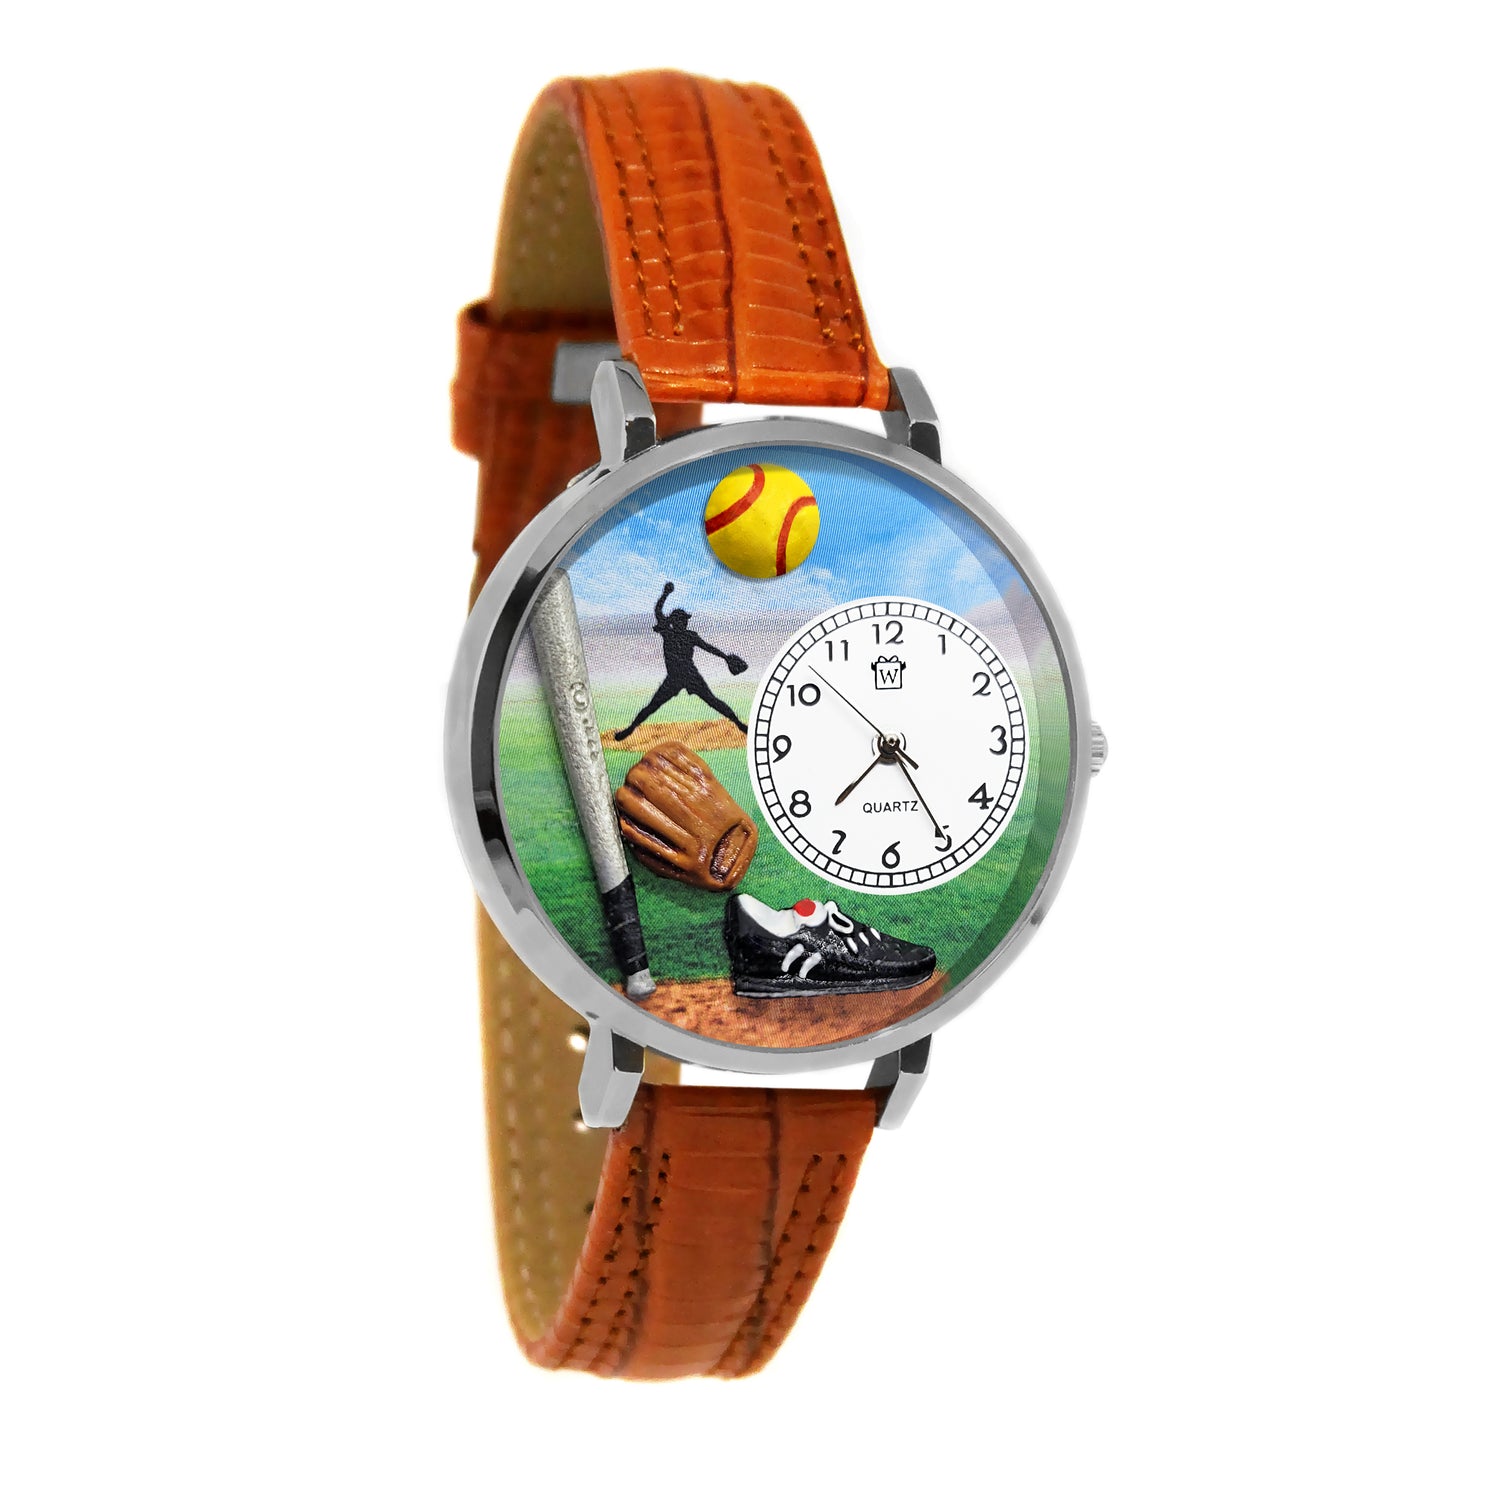 Whimsical Gifts | Softball 3D Watch Large Style | Handmade in USA | Hobbies & Special Interests | Sports | Novelty Unique Fun Miniatures Gift | Silver Finish Tan Leather Watch Band